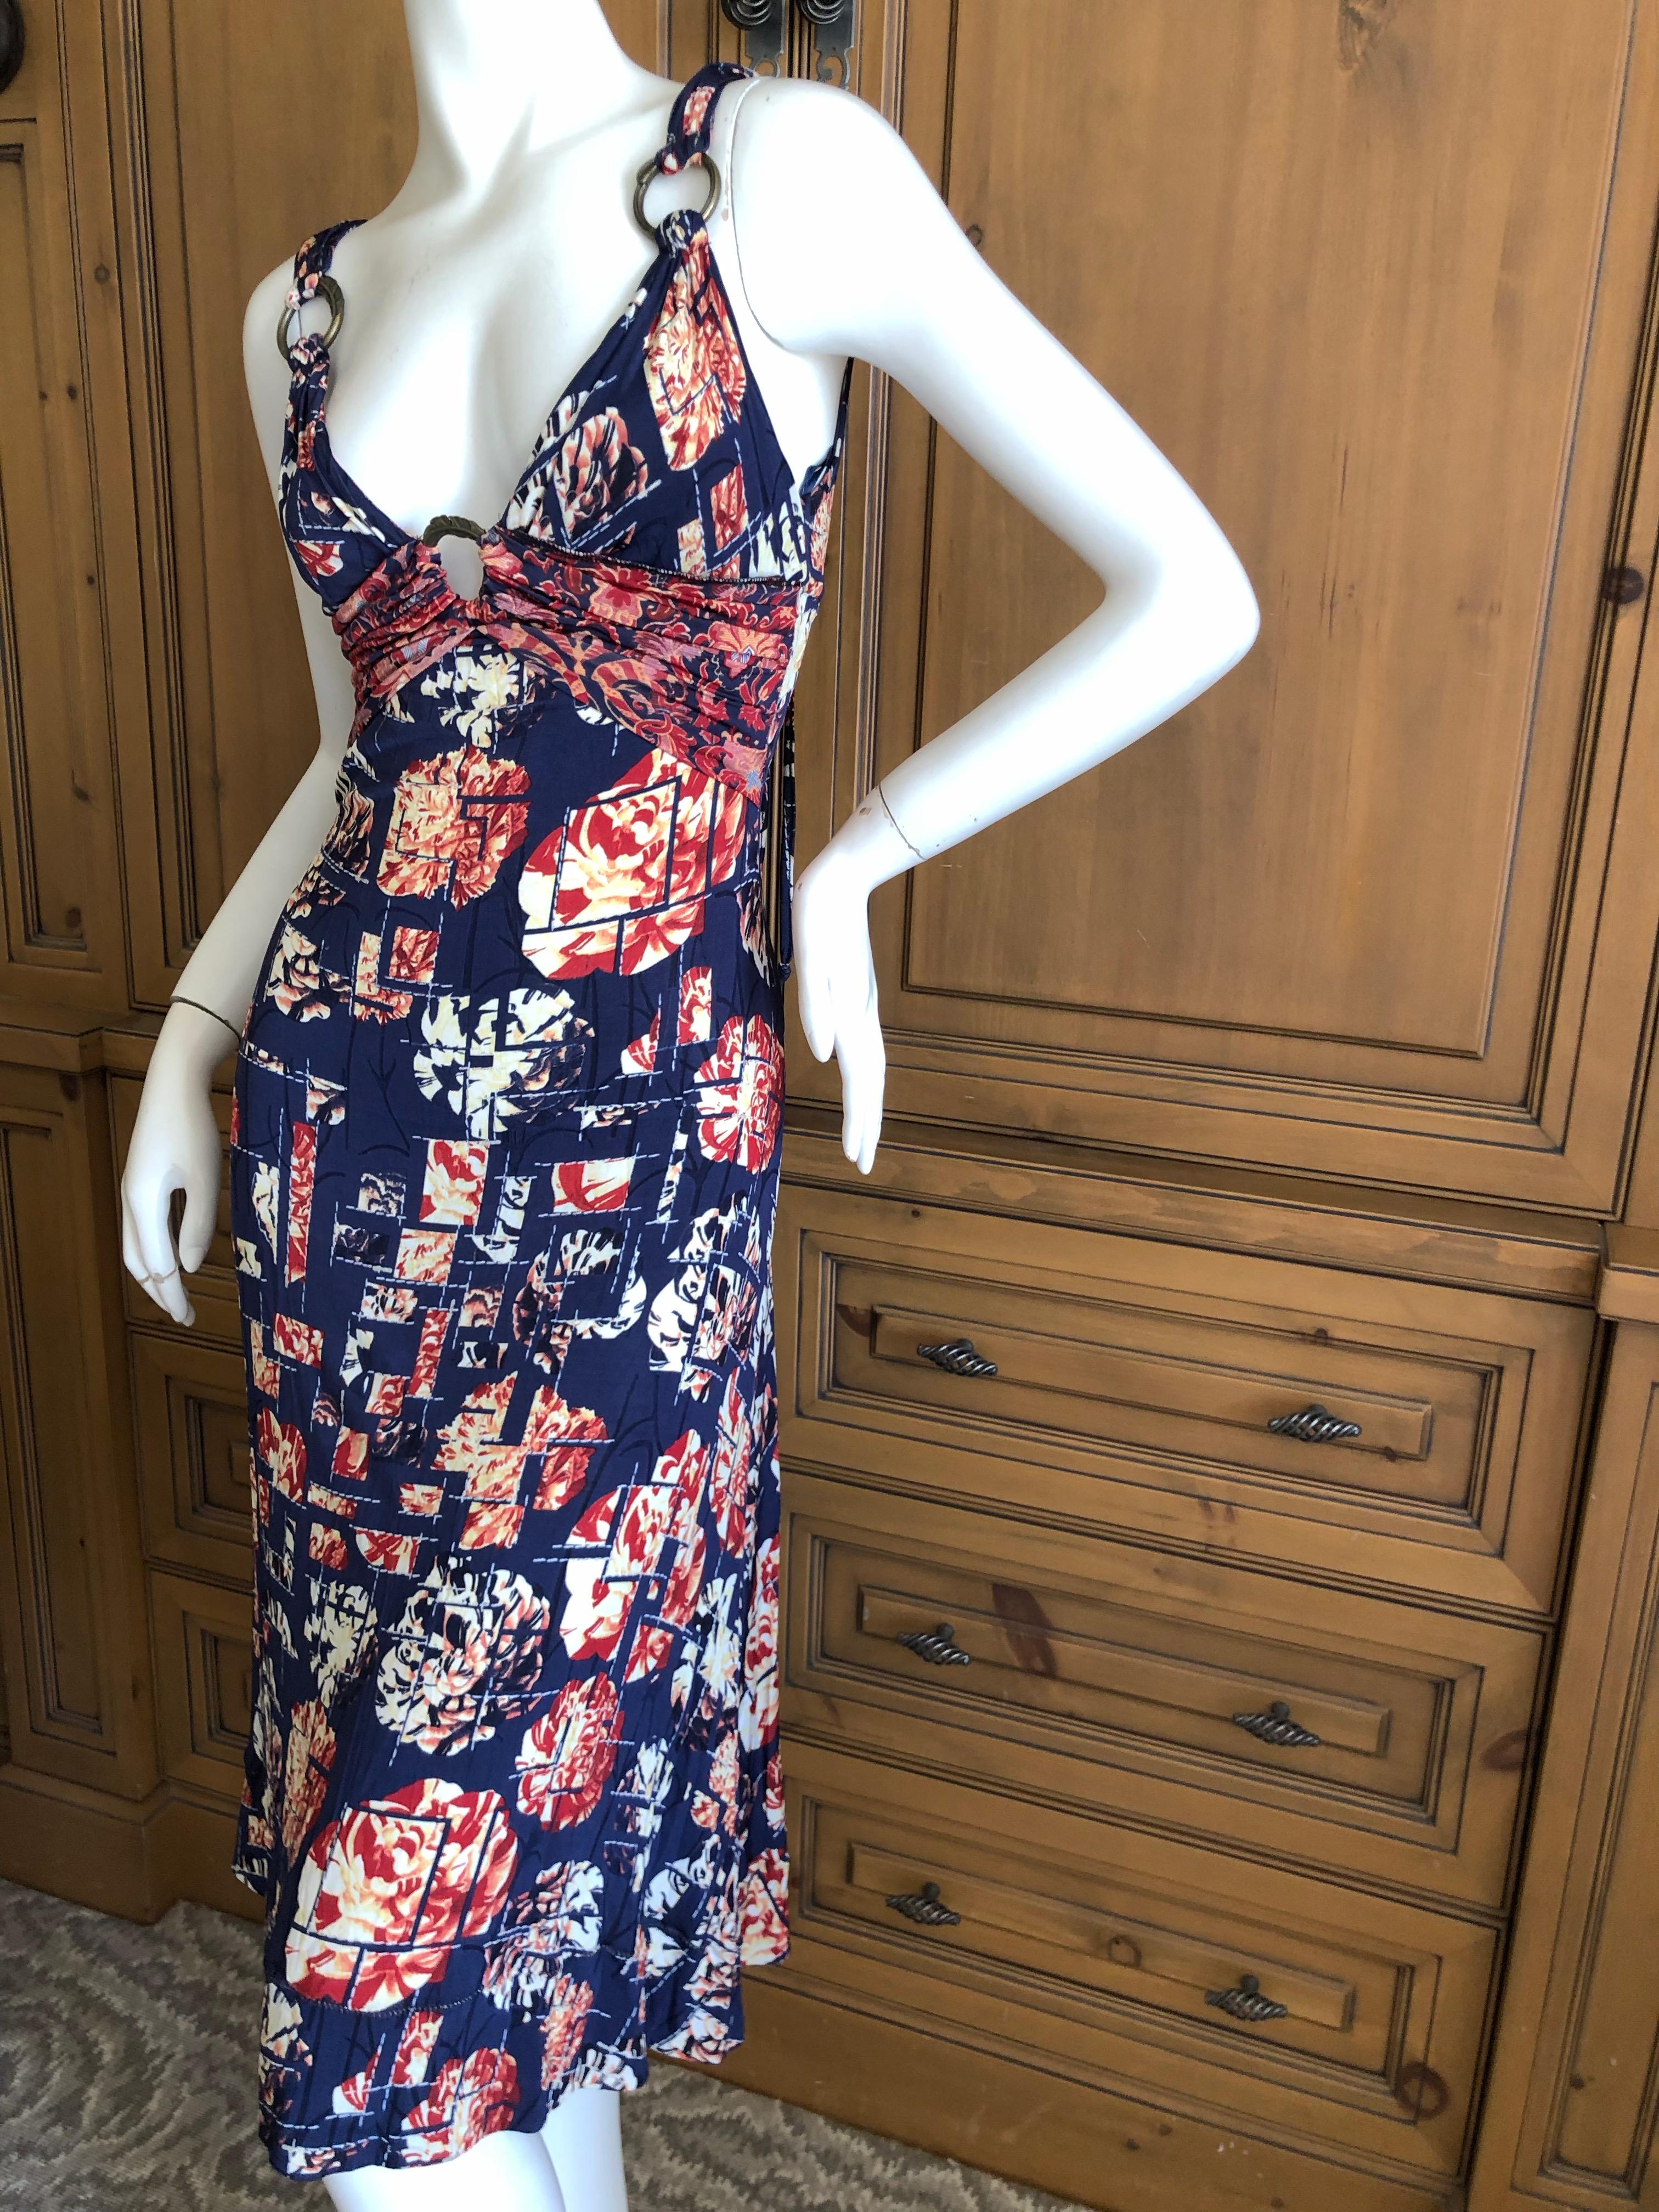 Roberto Cavalli for Just Cavalli Navy Blue Pattern Dress w Bronze Ring Details In Excellent Condition For Sale In Cloverdale, CA